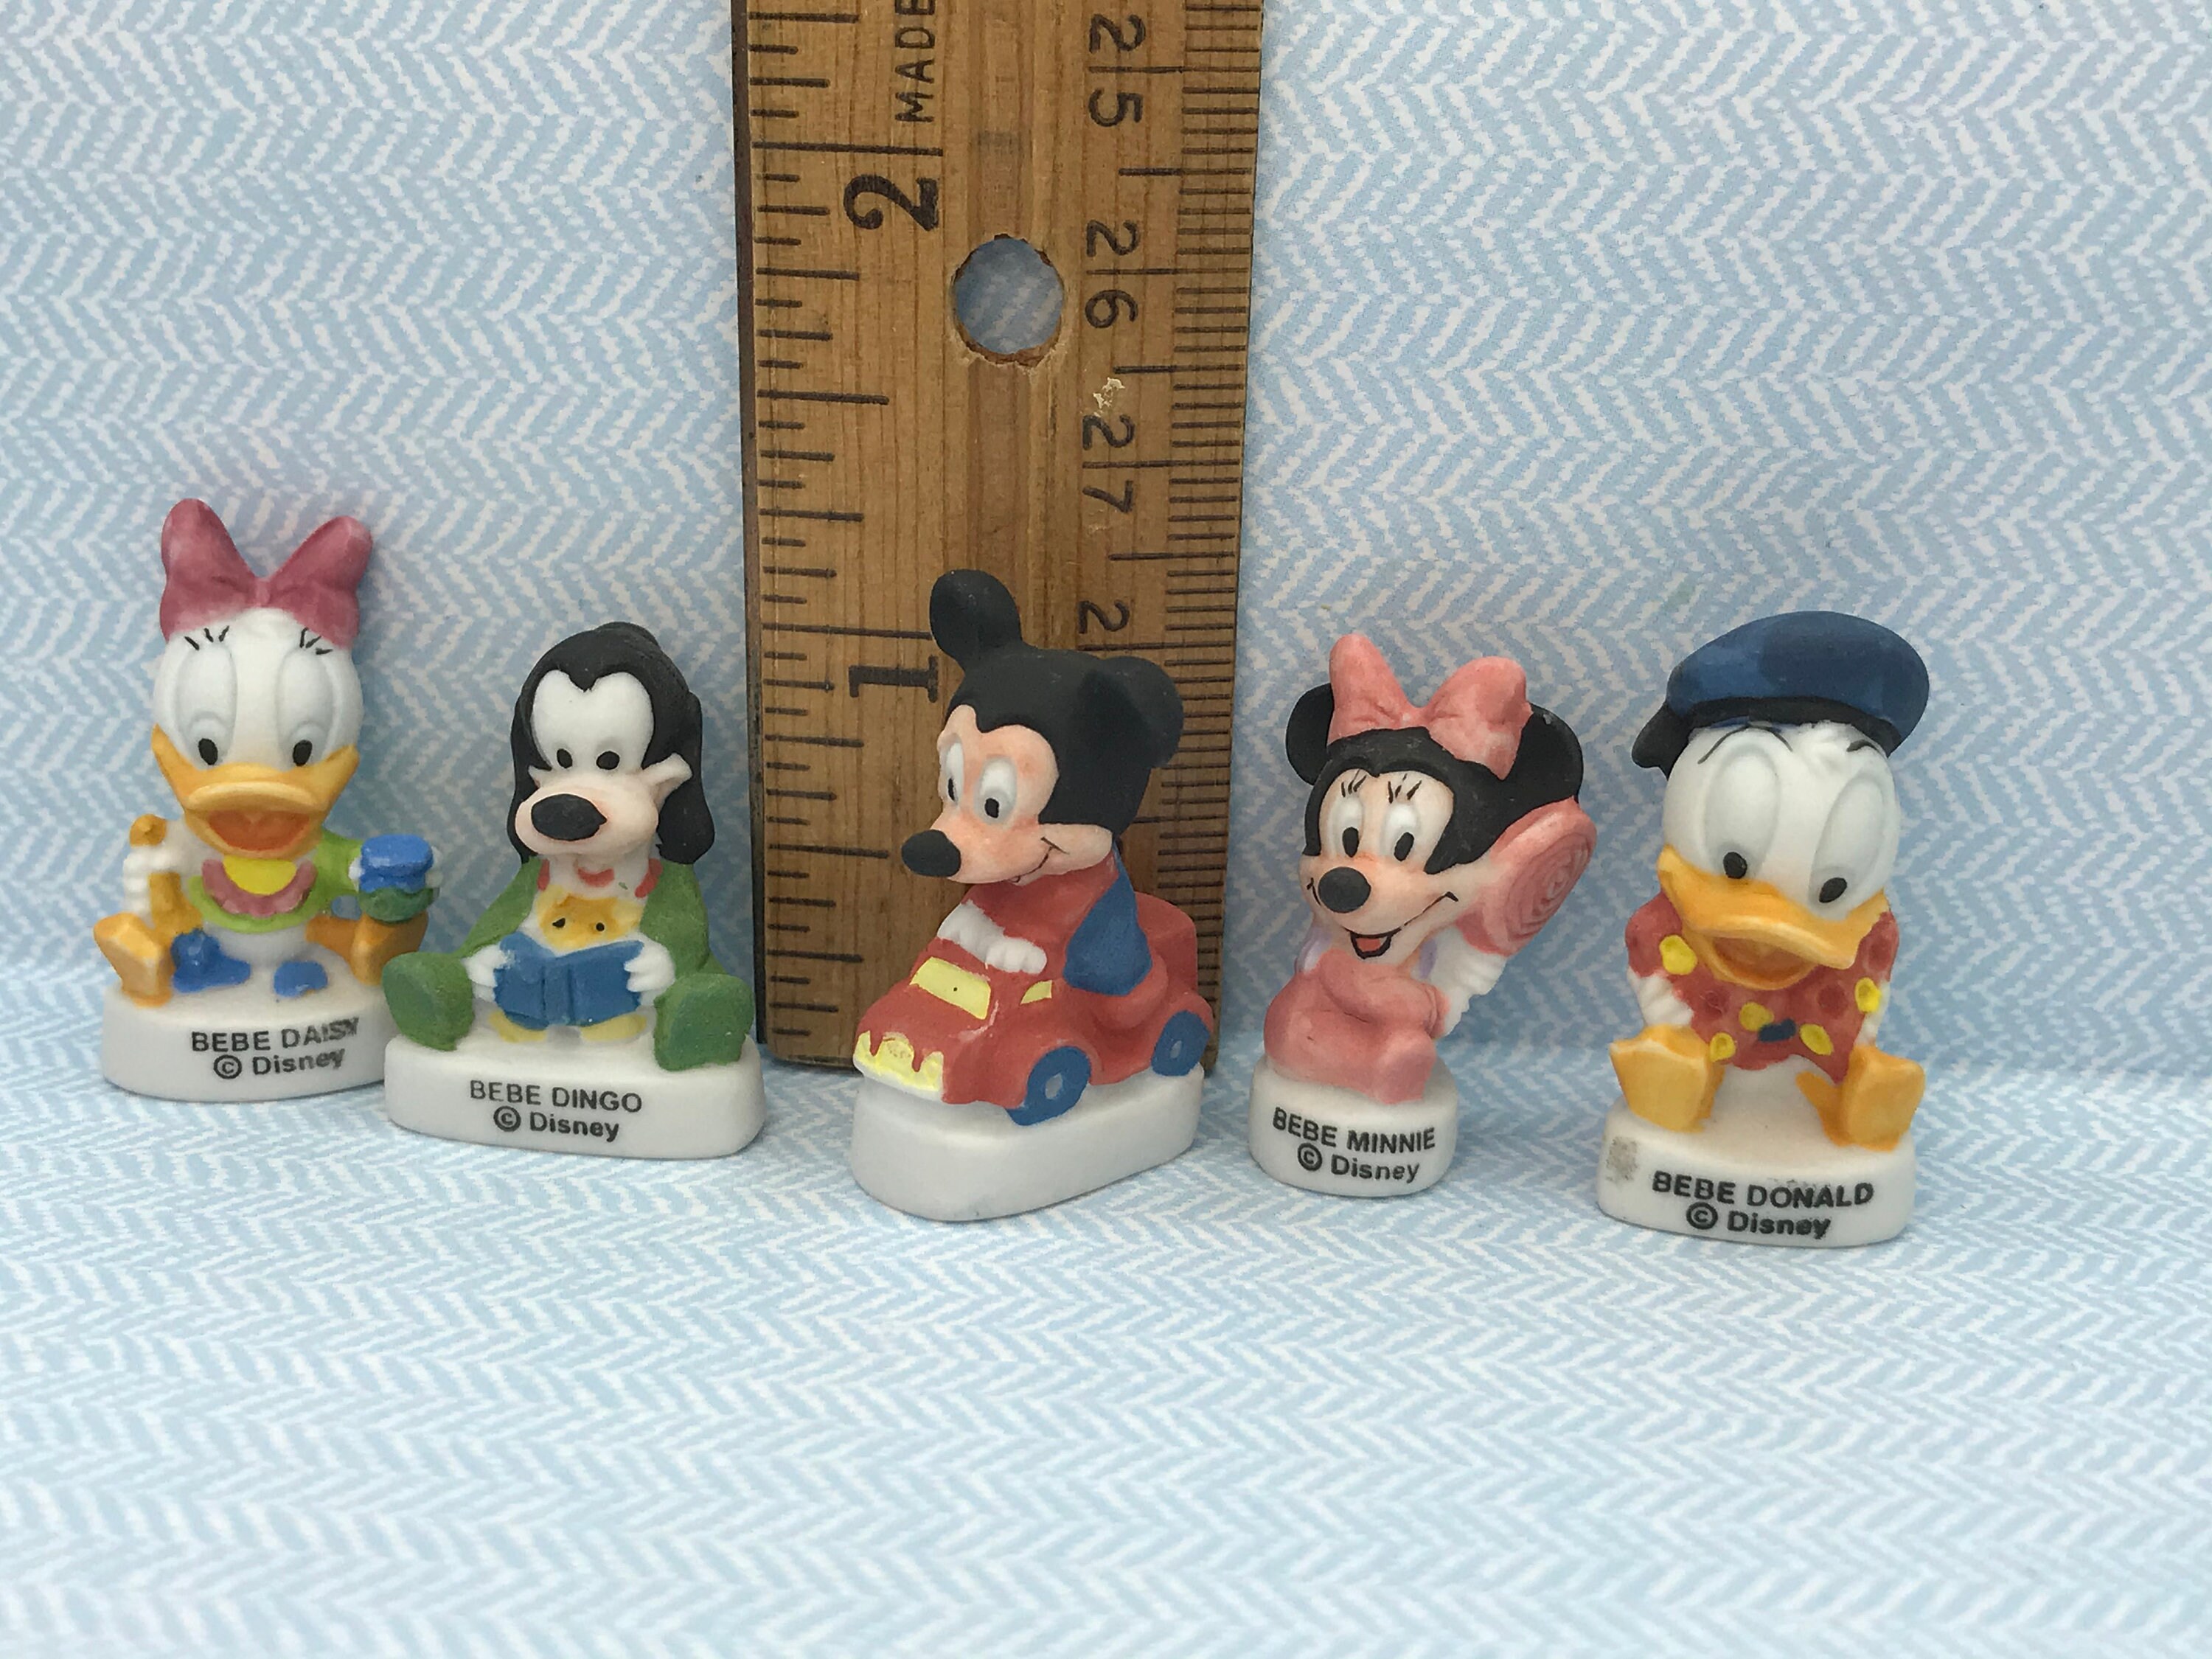 Vintage Miniature Figurine French Feve, Disney Mickey Mouse Figure,  Porcelain Dollhouse Décor, Small Statue, Epiphany Cake Topper Decoration 